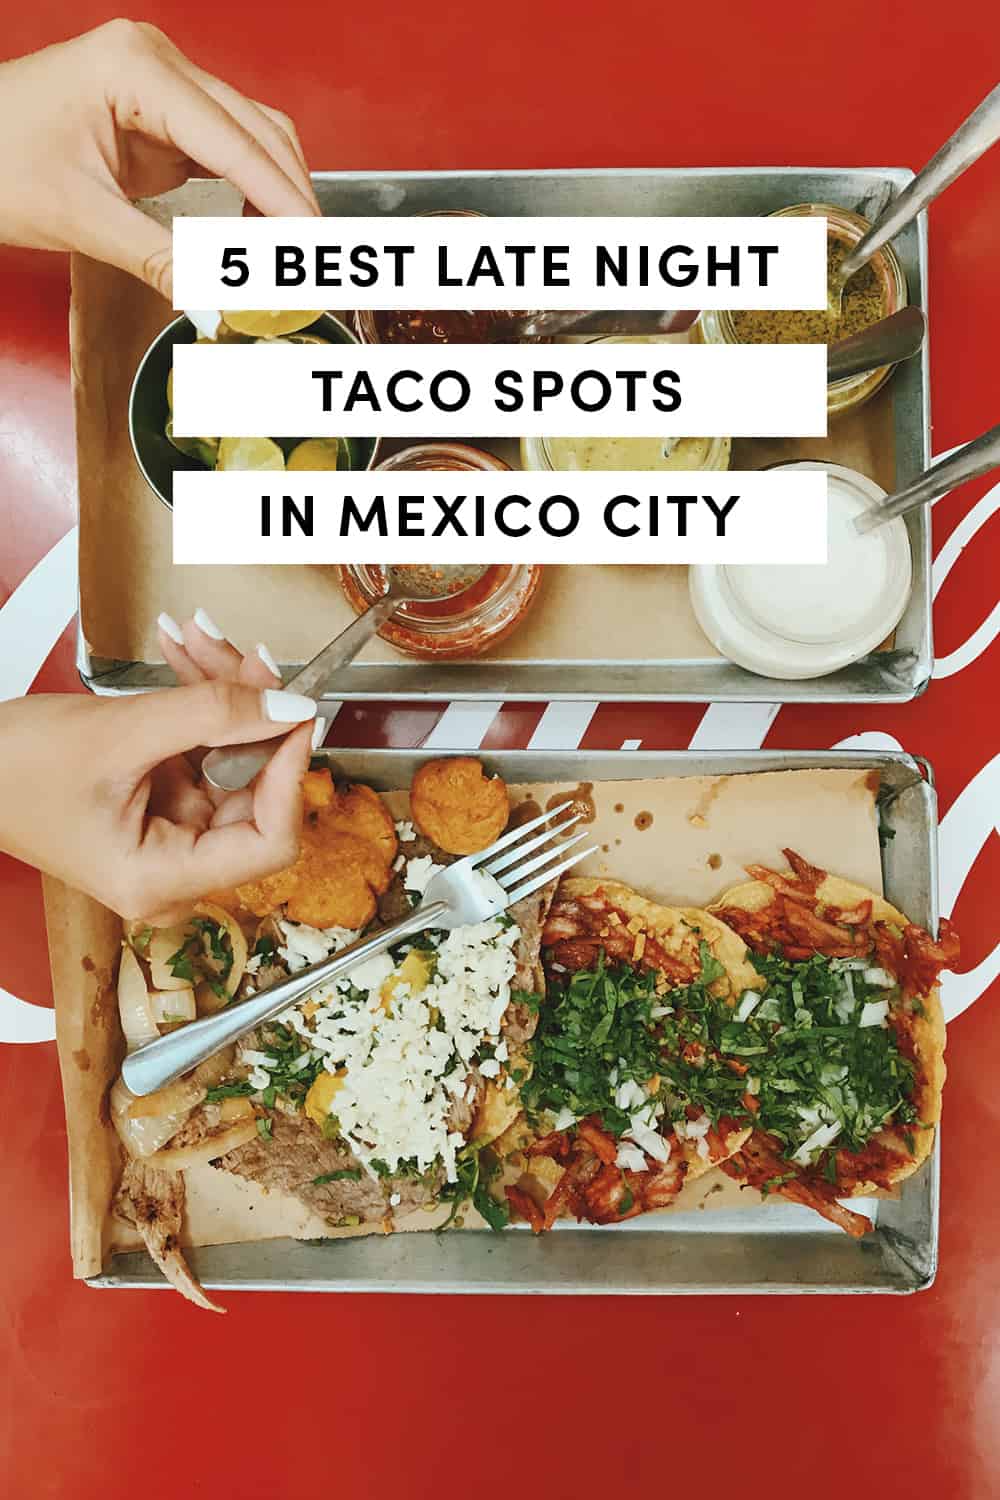 5 Best Late Night Taco Spots In Mexico City